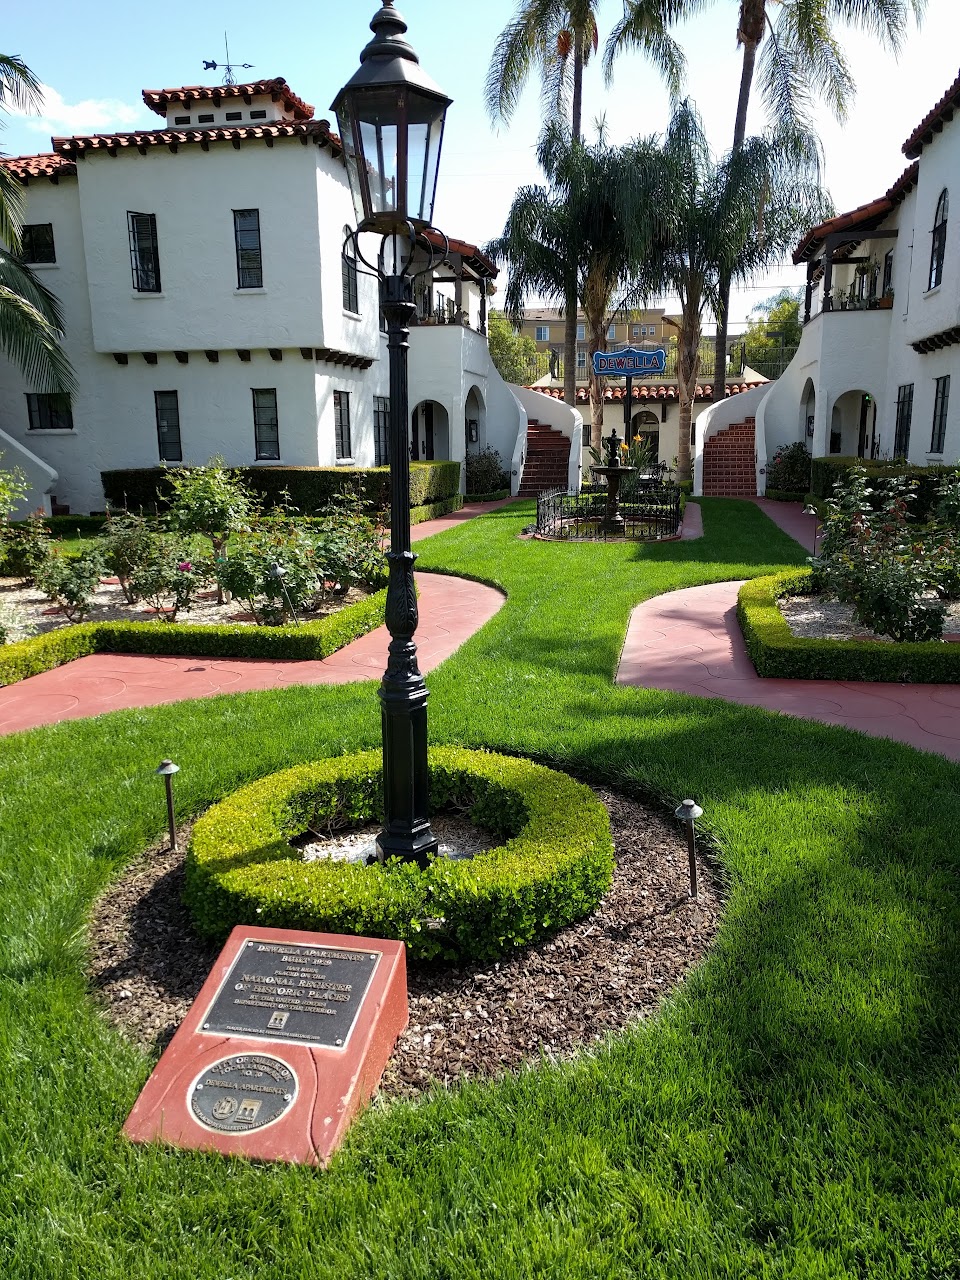 Photo of KLIMPEL MANOR. Affordable housing located at 229 E AMERIGE AVE FULLERTON, CA 92832